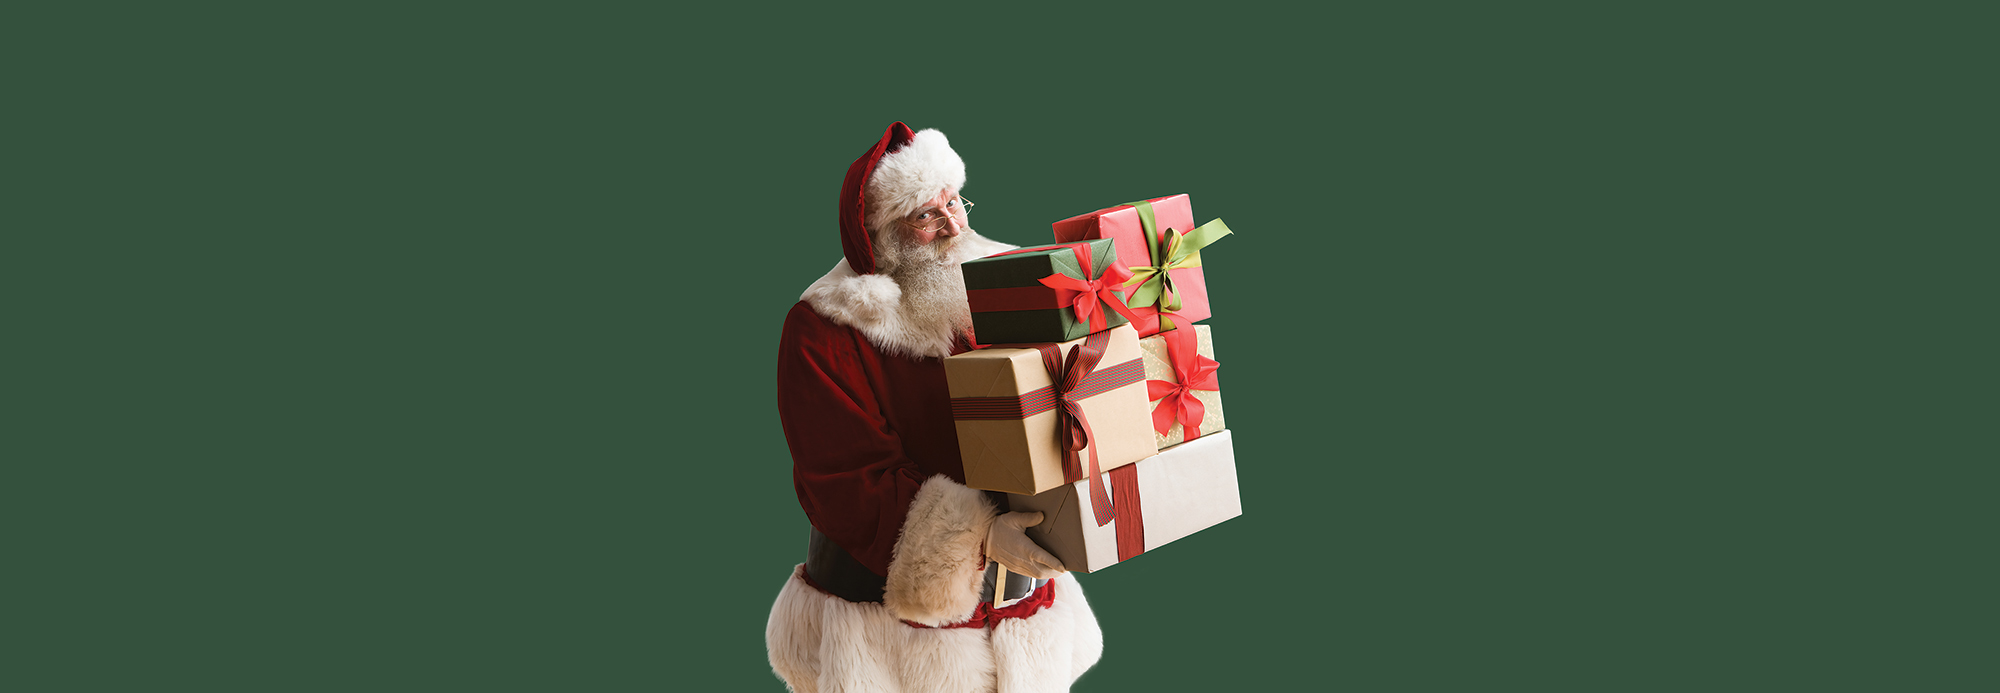 Santa carrying a pile of presents